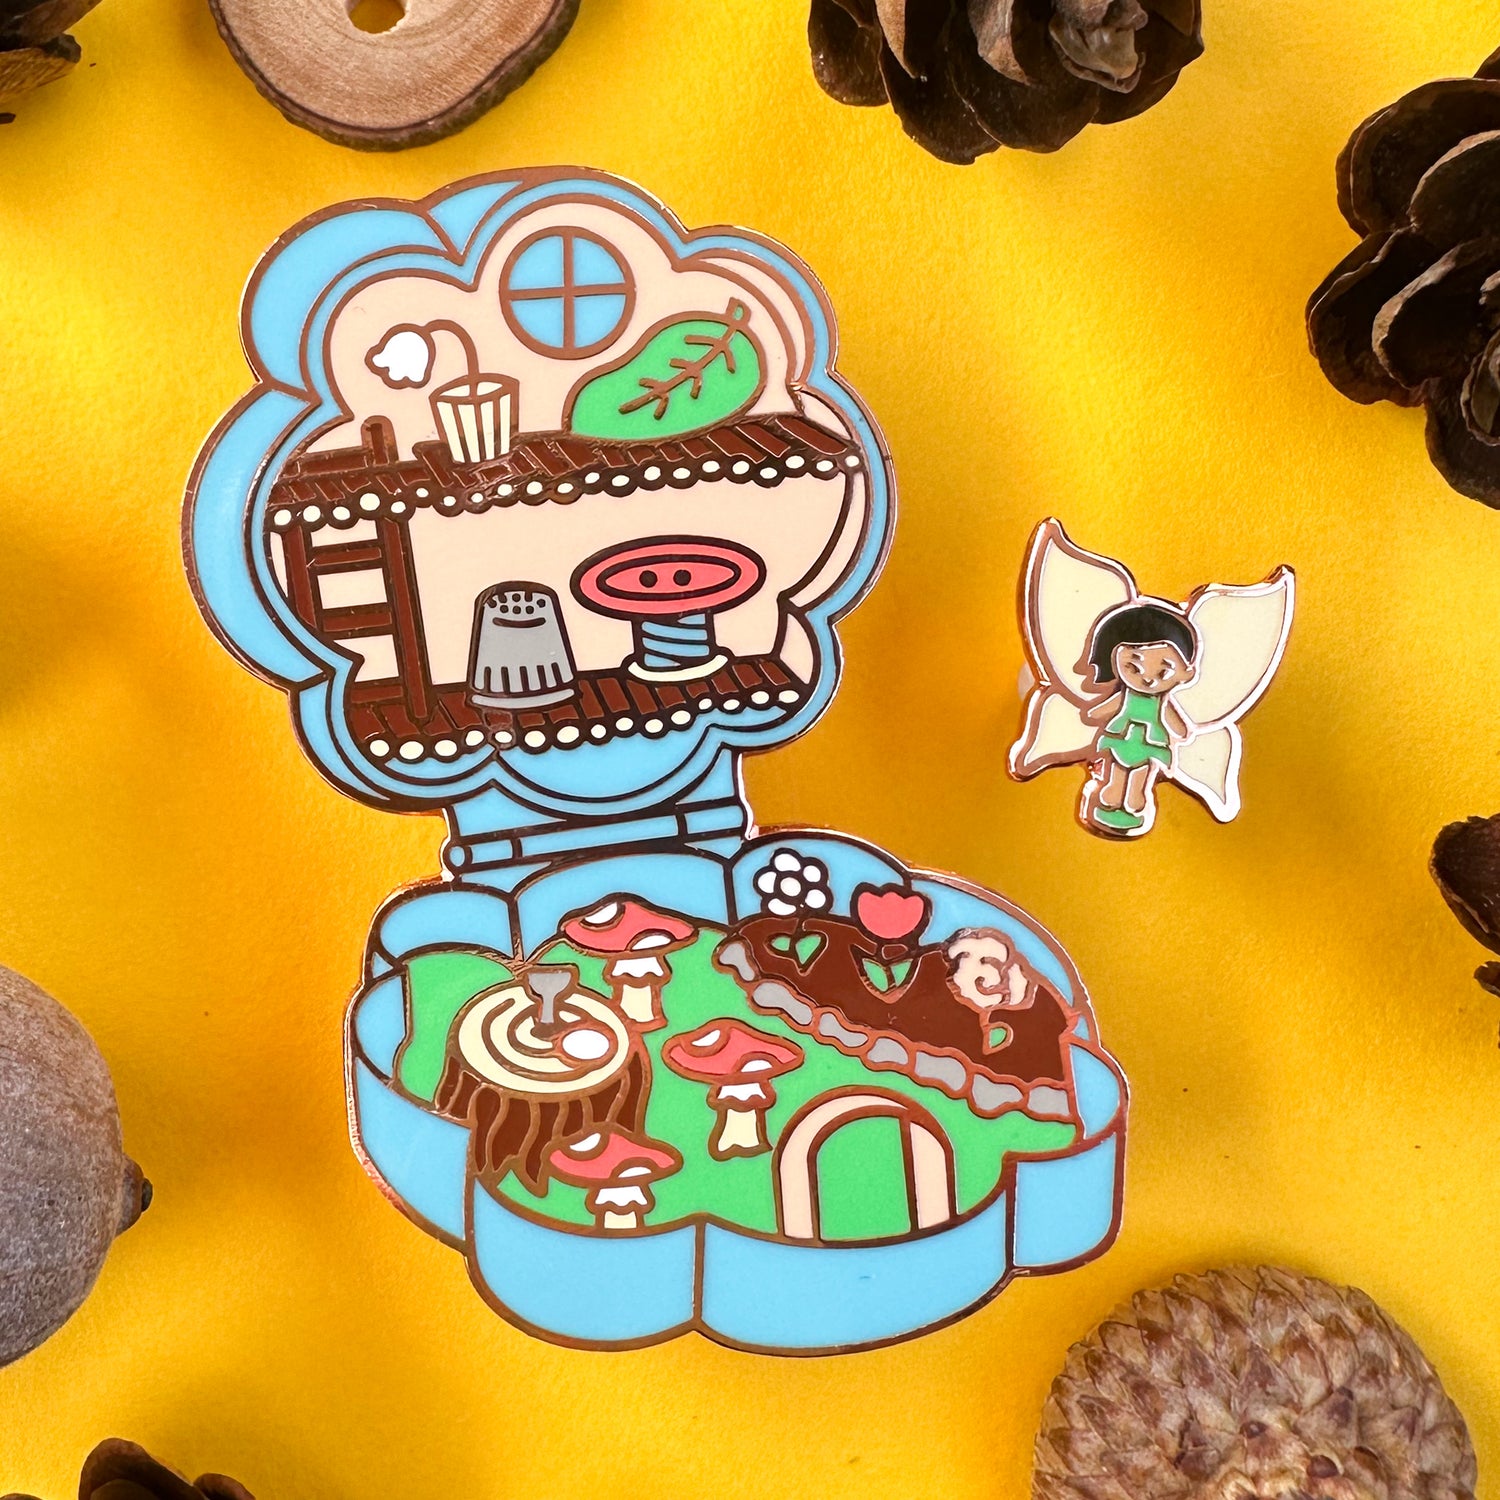 An enamel pin shaped like a Polly Pocket toy with a tiny fairy doll and a flower compact house. The pin is on a yellow background with pinecones and acorns strewn about it. 